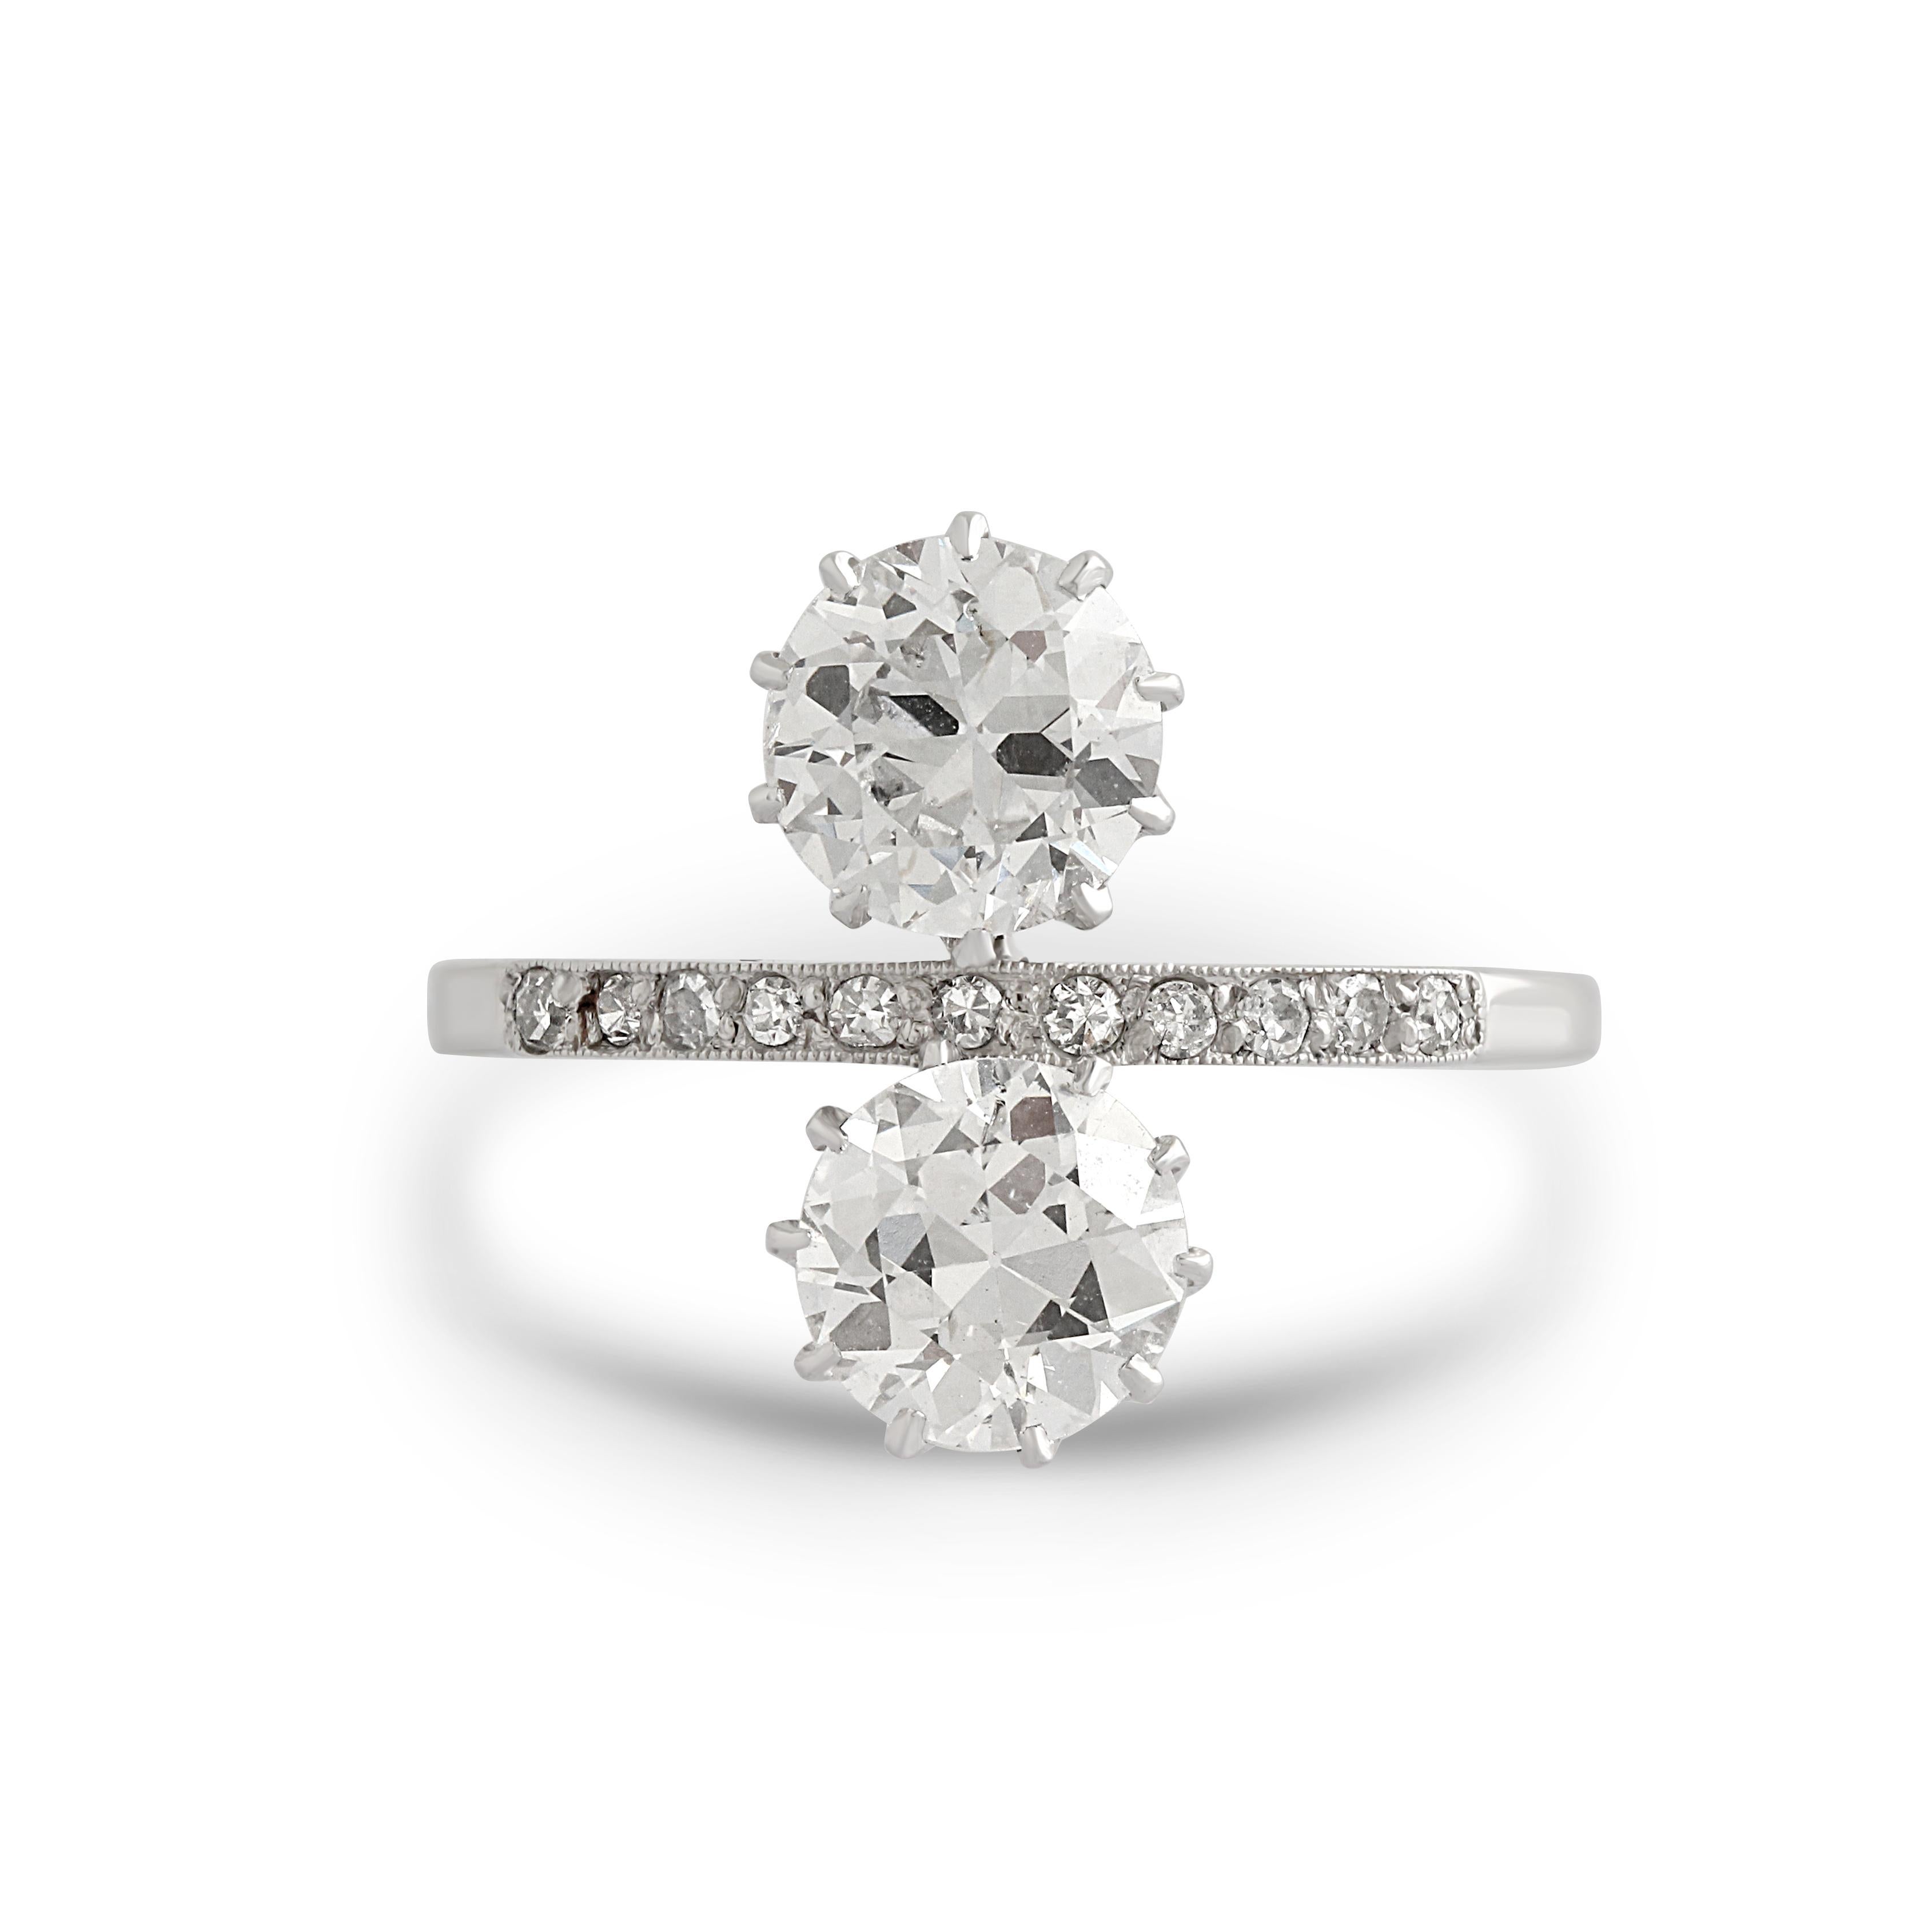 A platinum and diamond toi et moi ring. Toi et moi is the French for you and me and the style symbolises the coming together of two people in love by two gemstones resting beside one another.

This ring is set with approximately 1.90 carats of